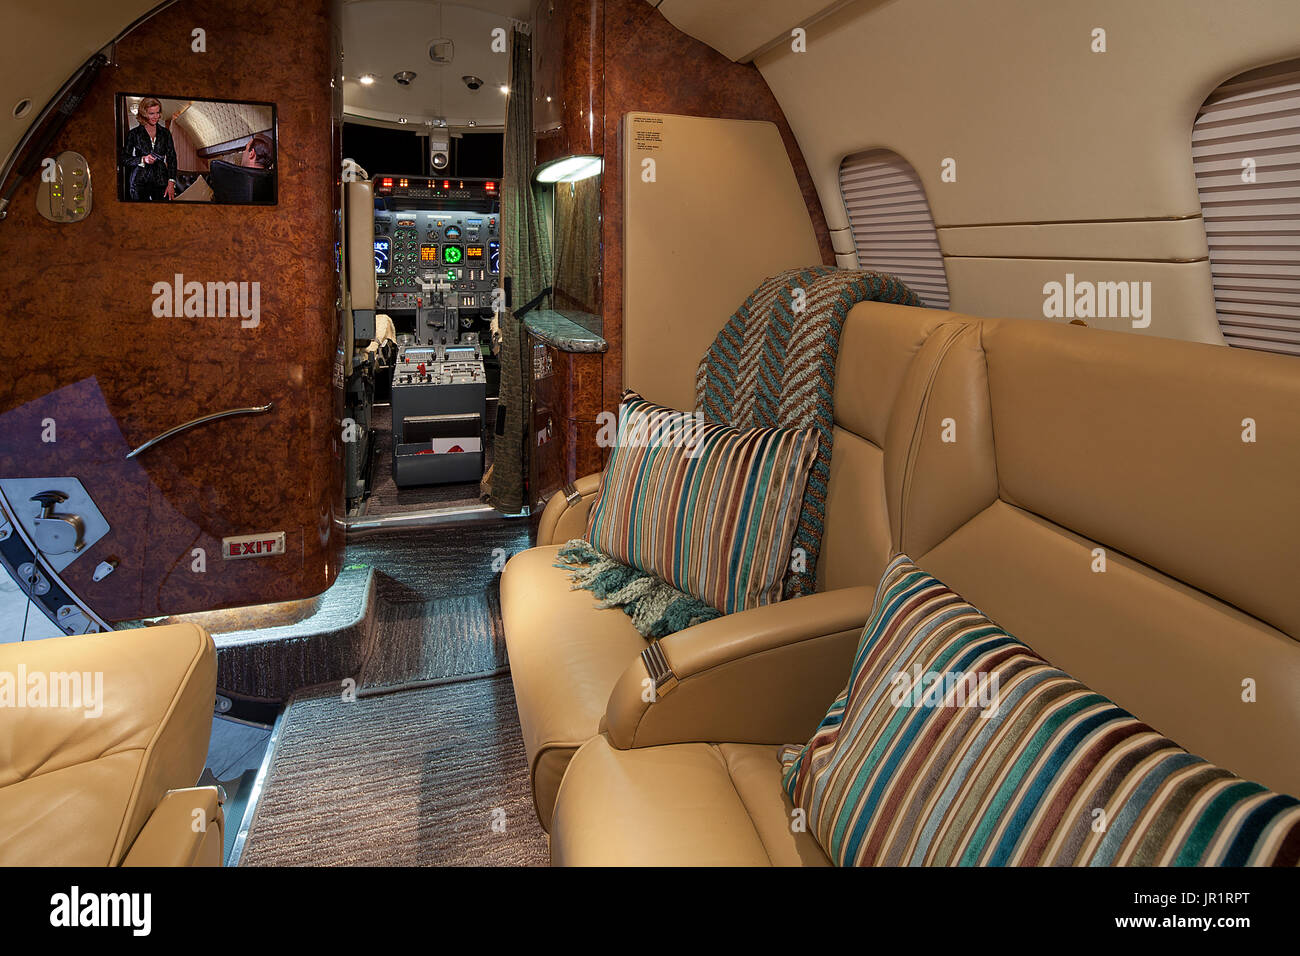 Cabin in private Lear 60 jet aircraft Stock Photo